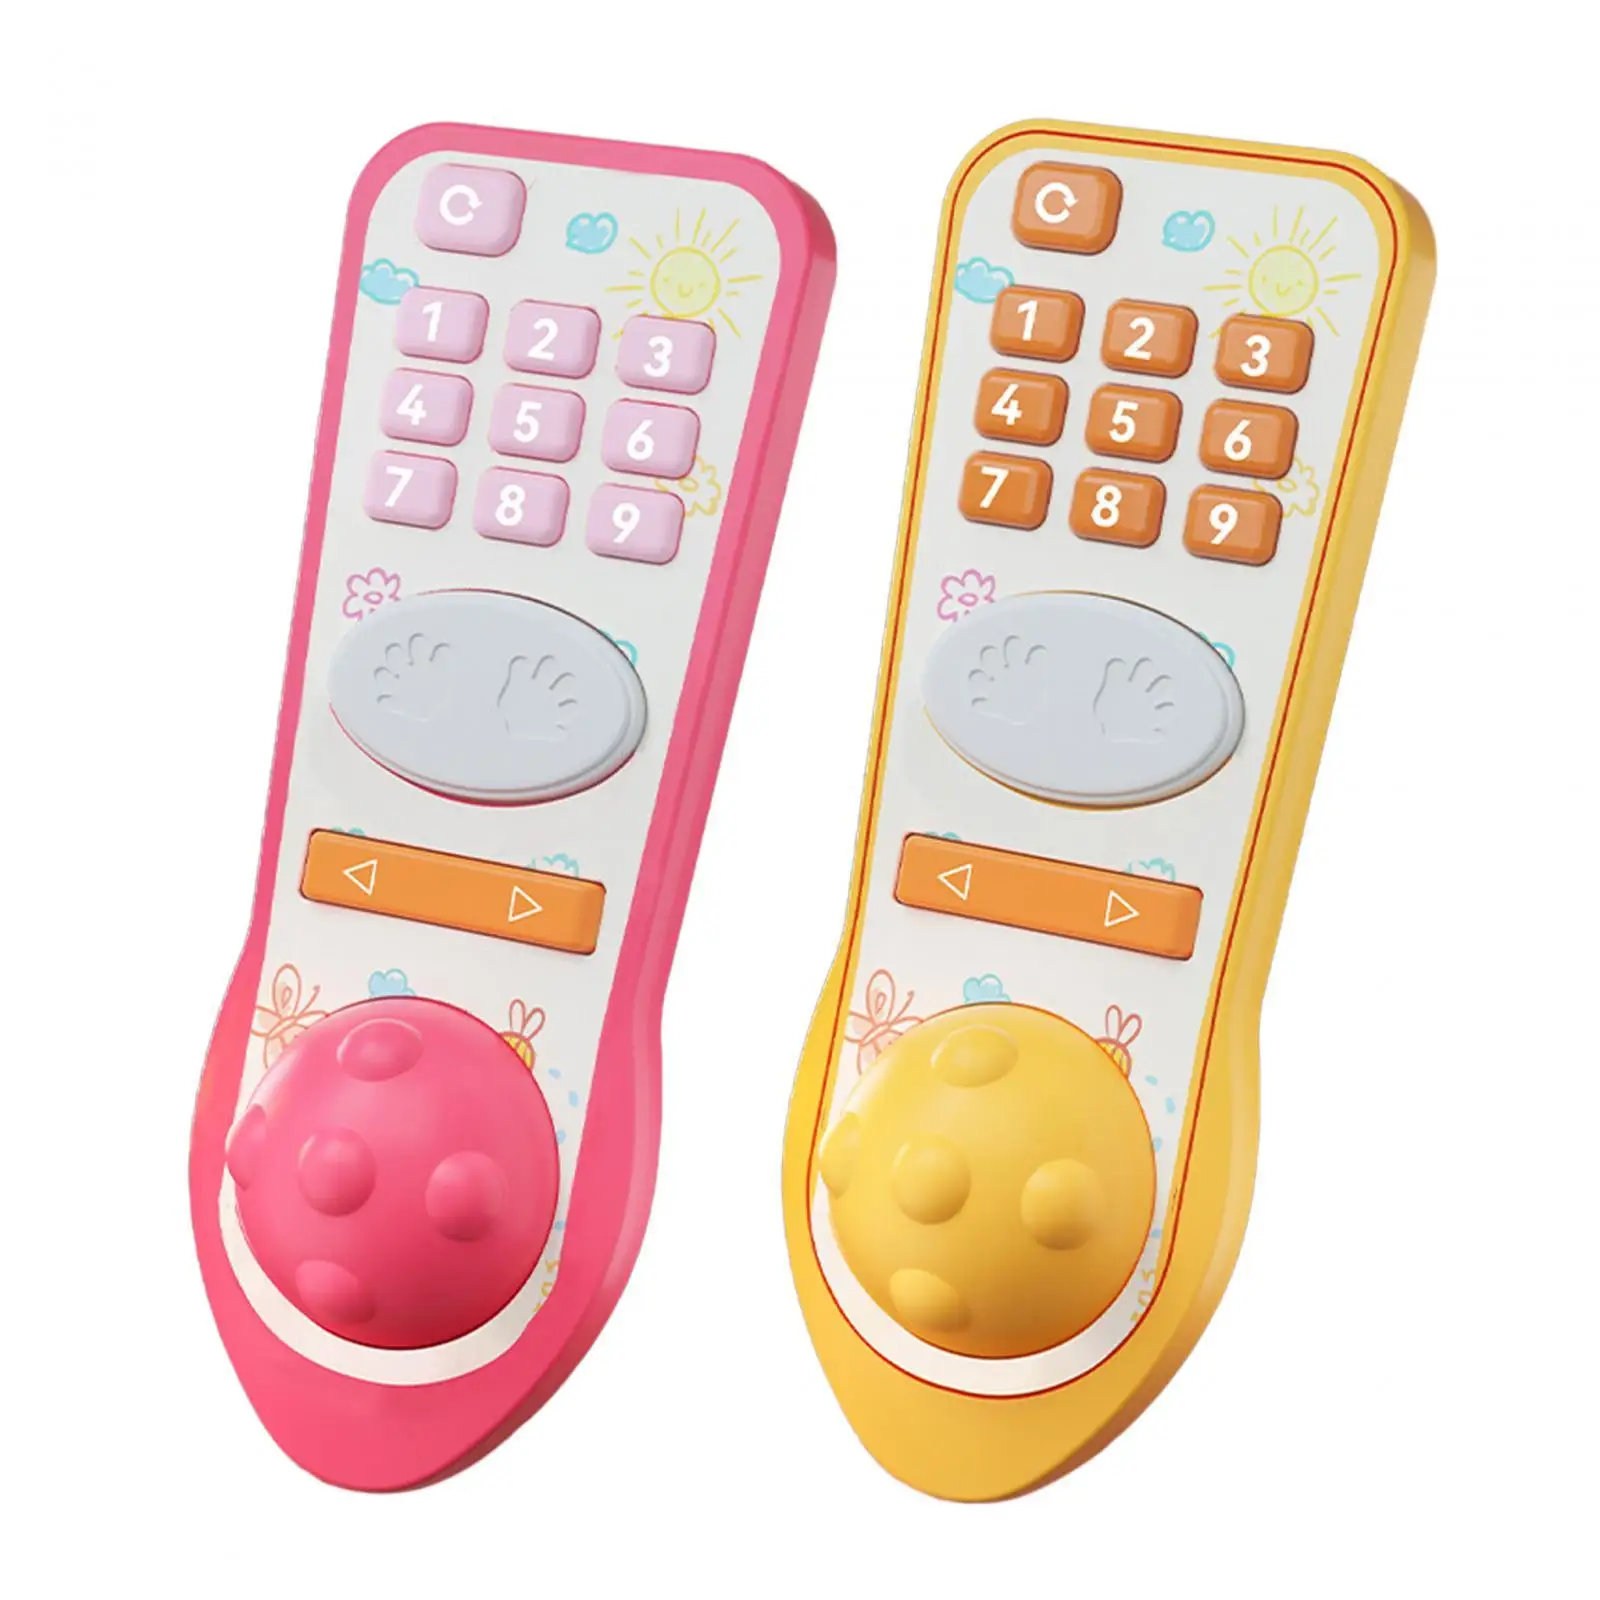 TV Remote Control Toy Realistic Fun Learning Early Education for 12 to 18 Months Boys Girls Toddler Infants Birthday Gifts